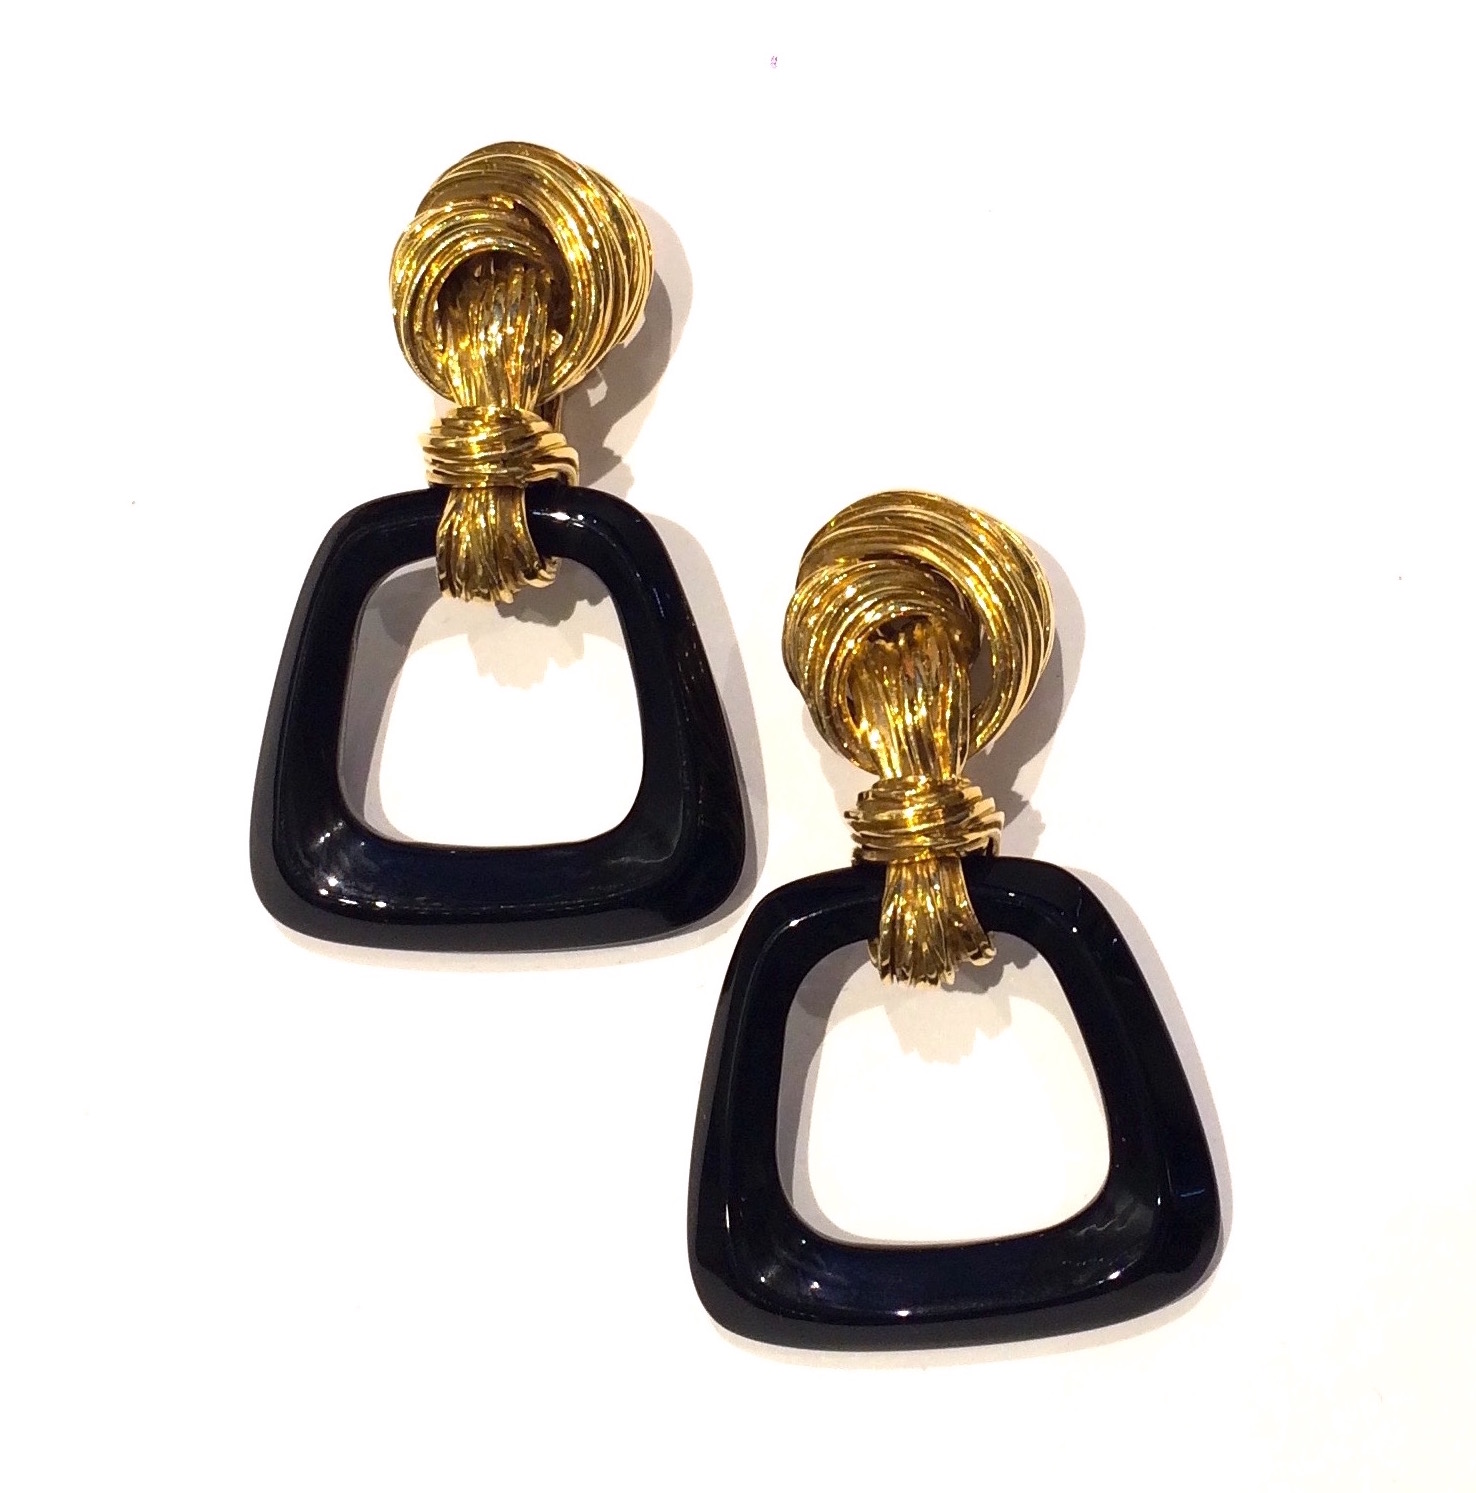 Kutchinsky “Turban” earrings, 18K yellow gold with onyx squared loops, signed, c. 1970’s